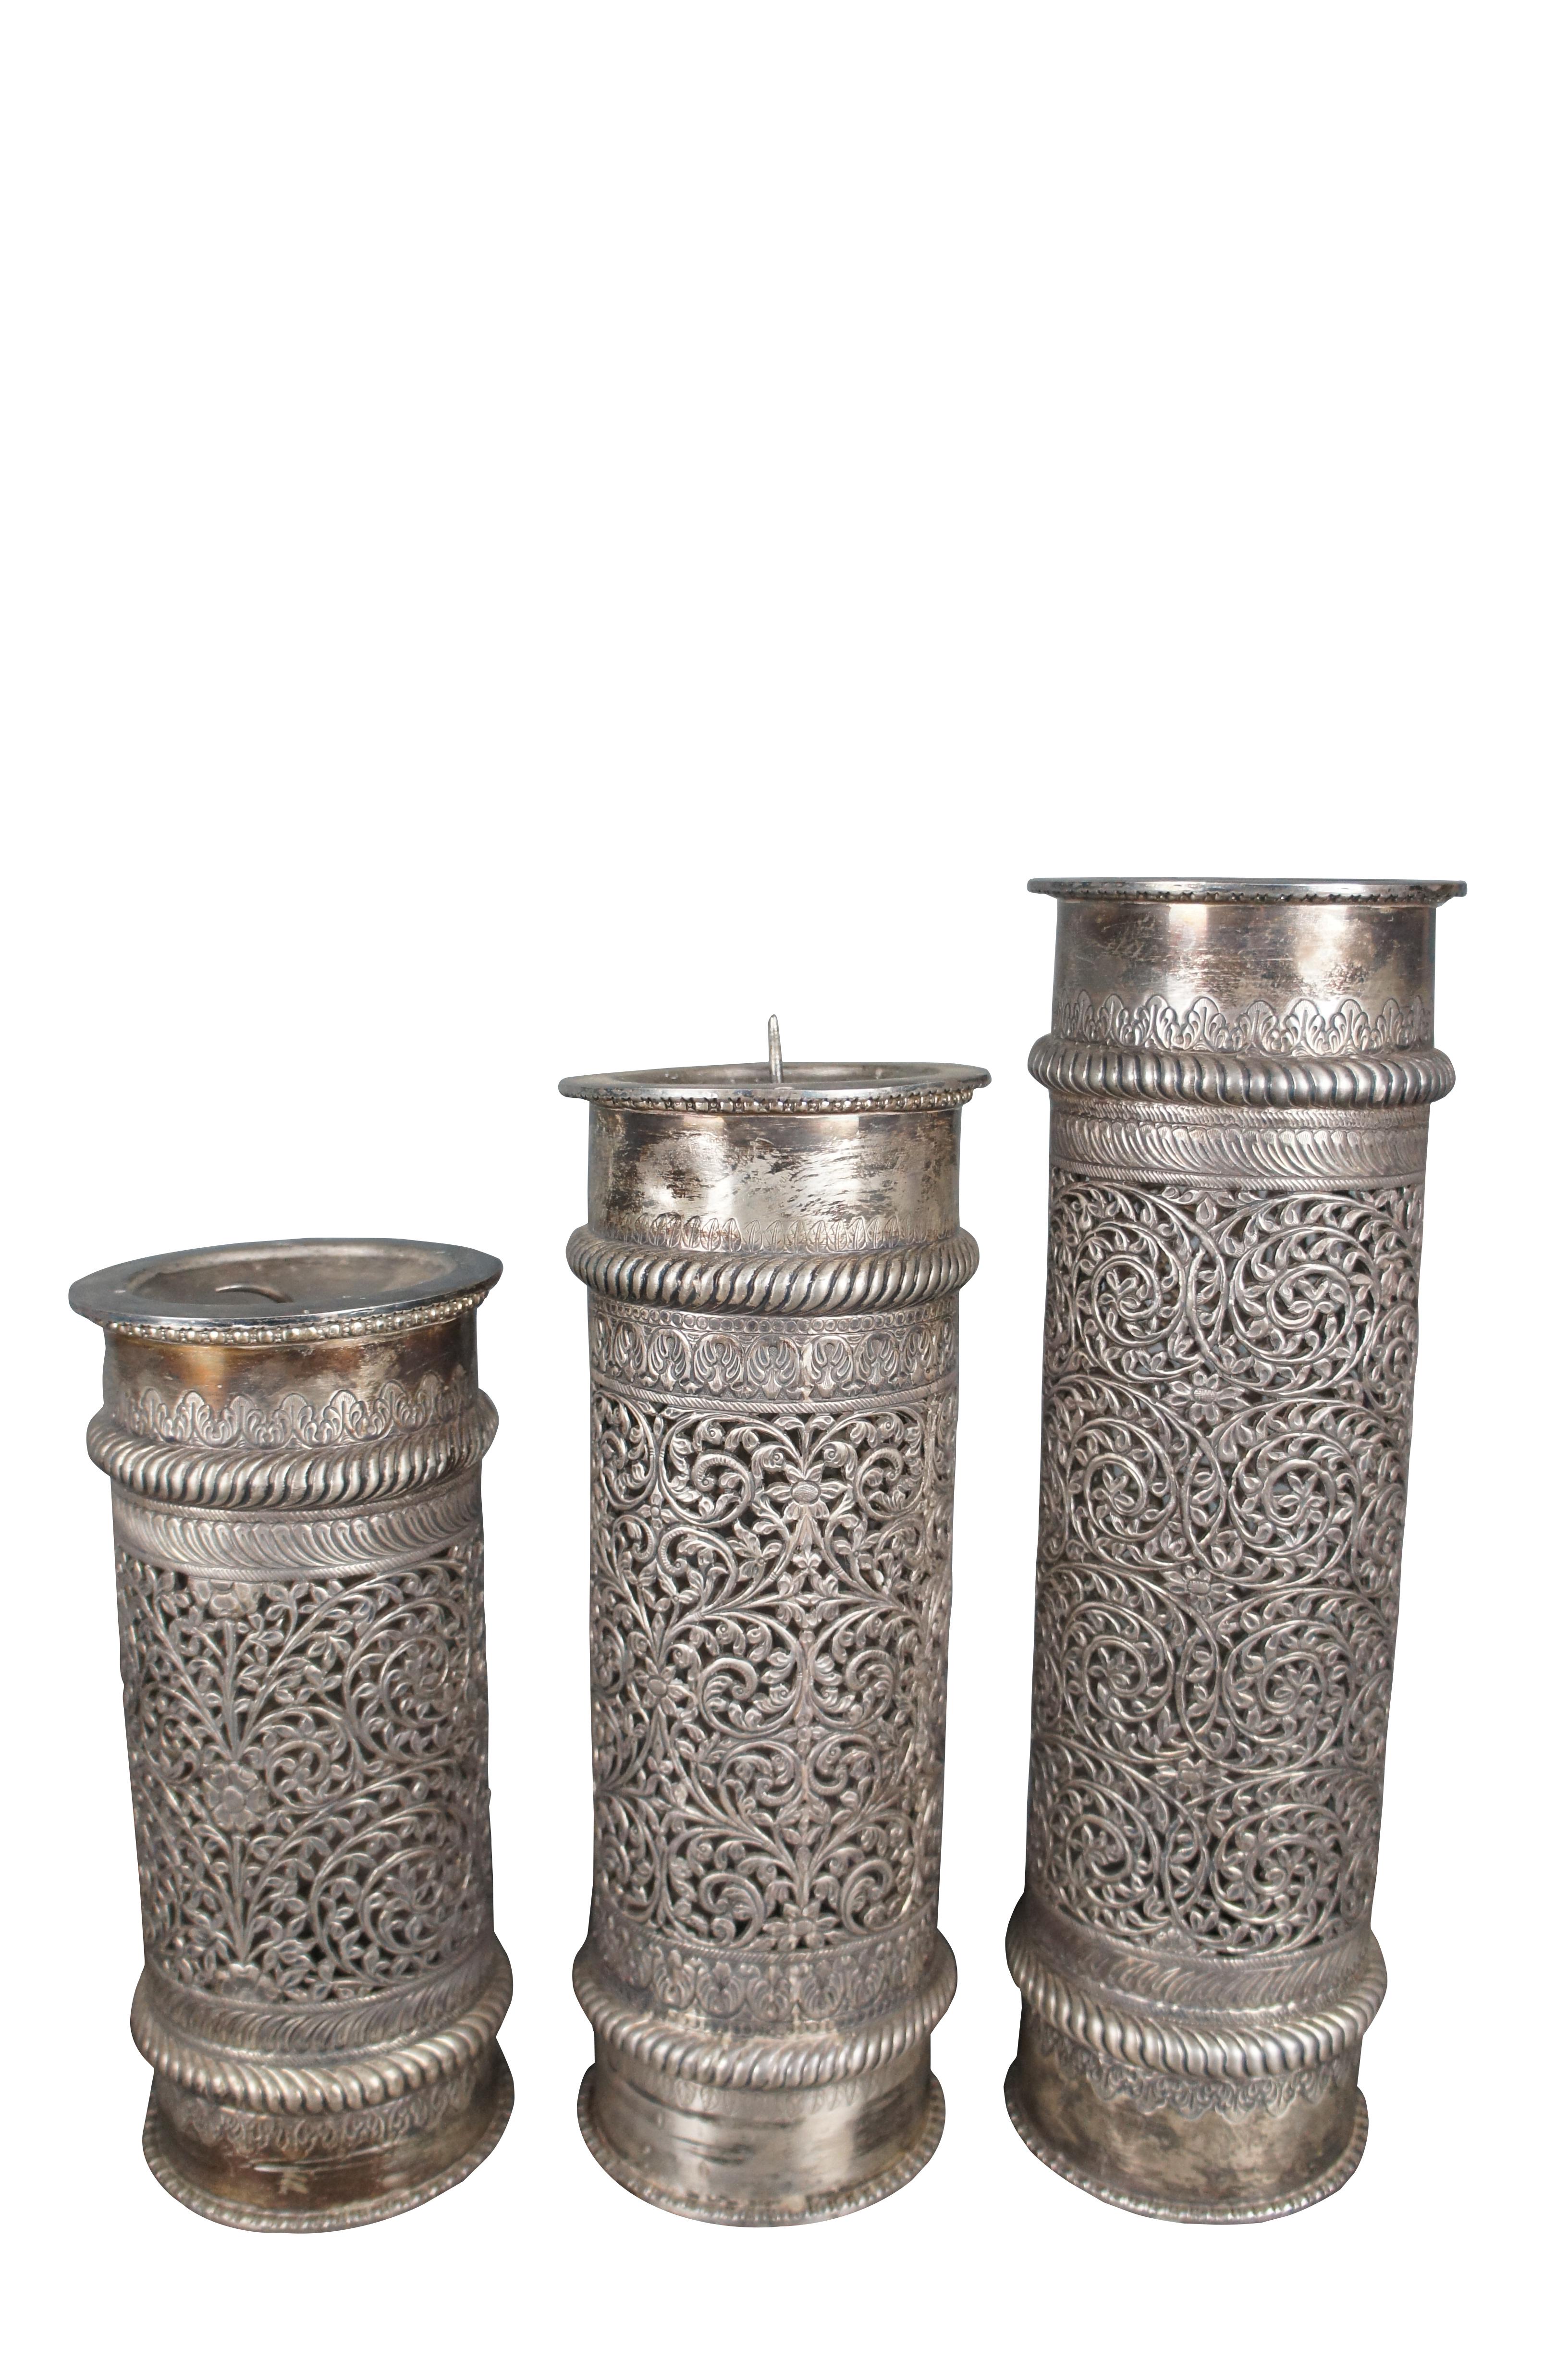 5 Moroccan Reticulated Silver Candle Holder. Tops remove allowing for interior use

Dimensions:
4.25